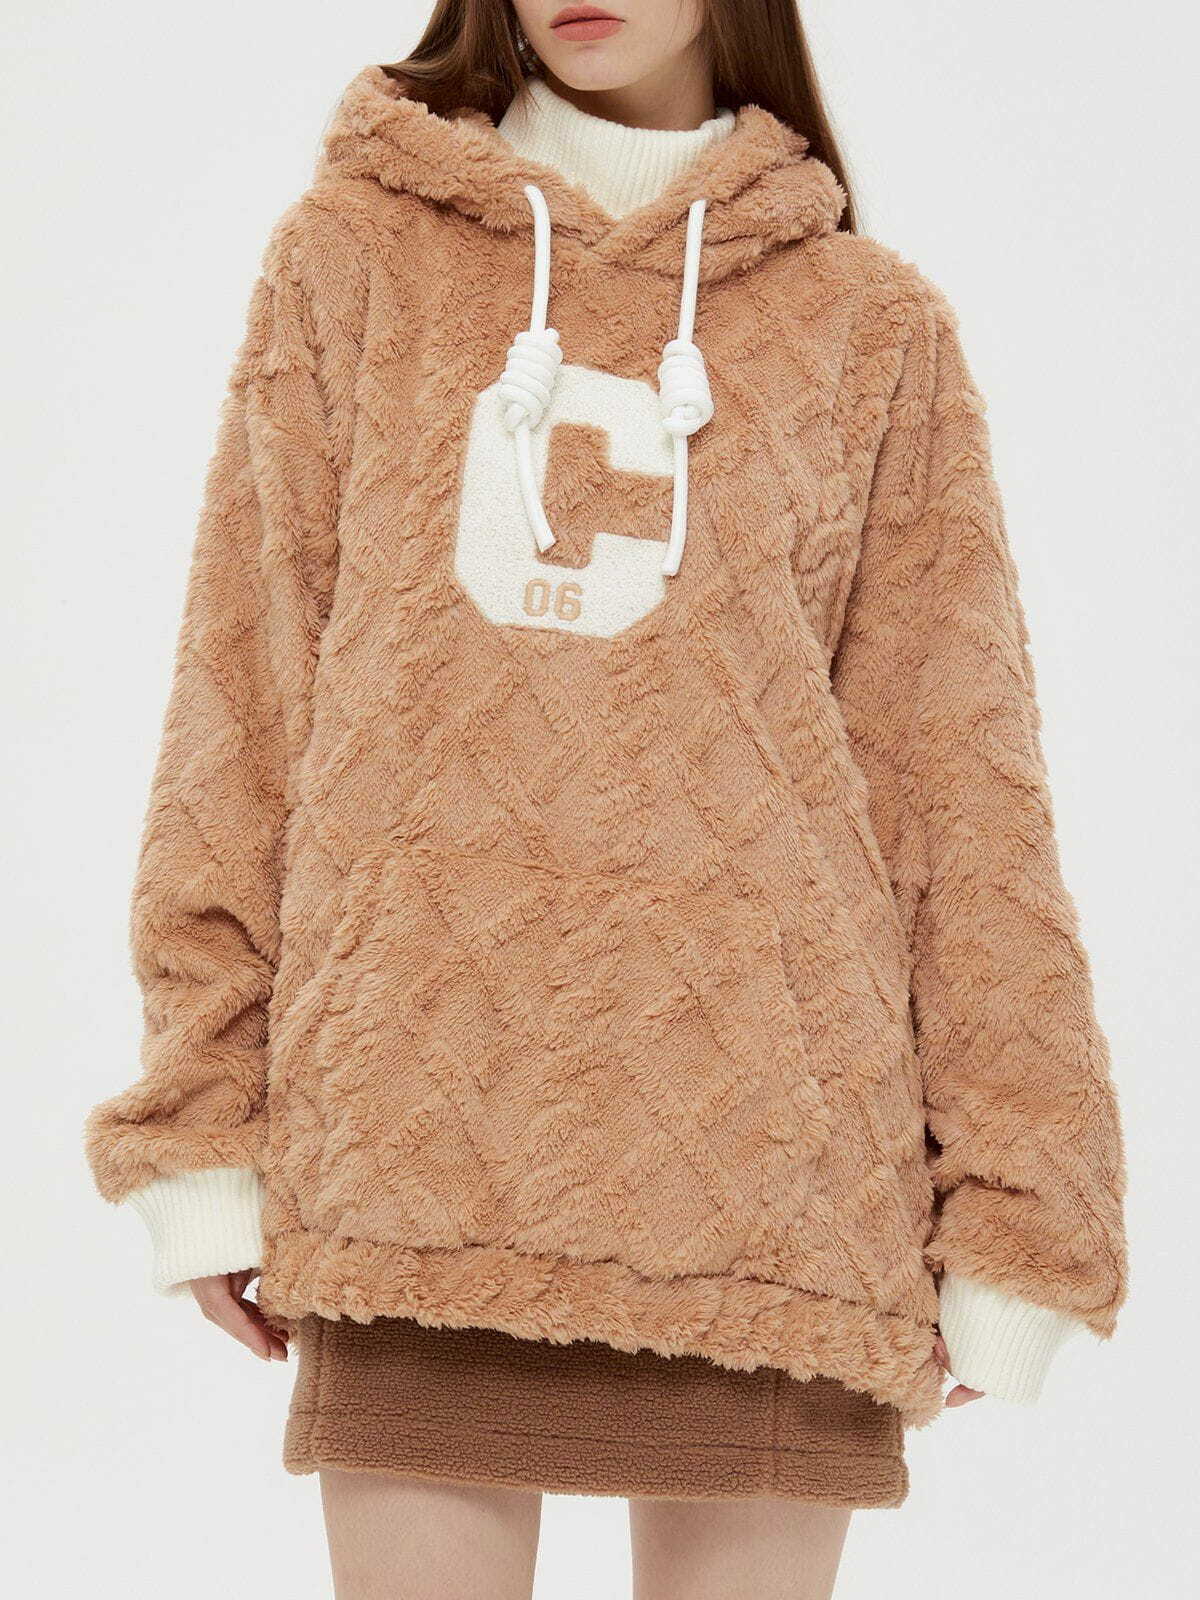 quirky flocking hoodie unique & playful streetwear 3054